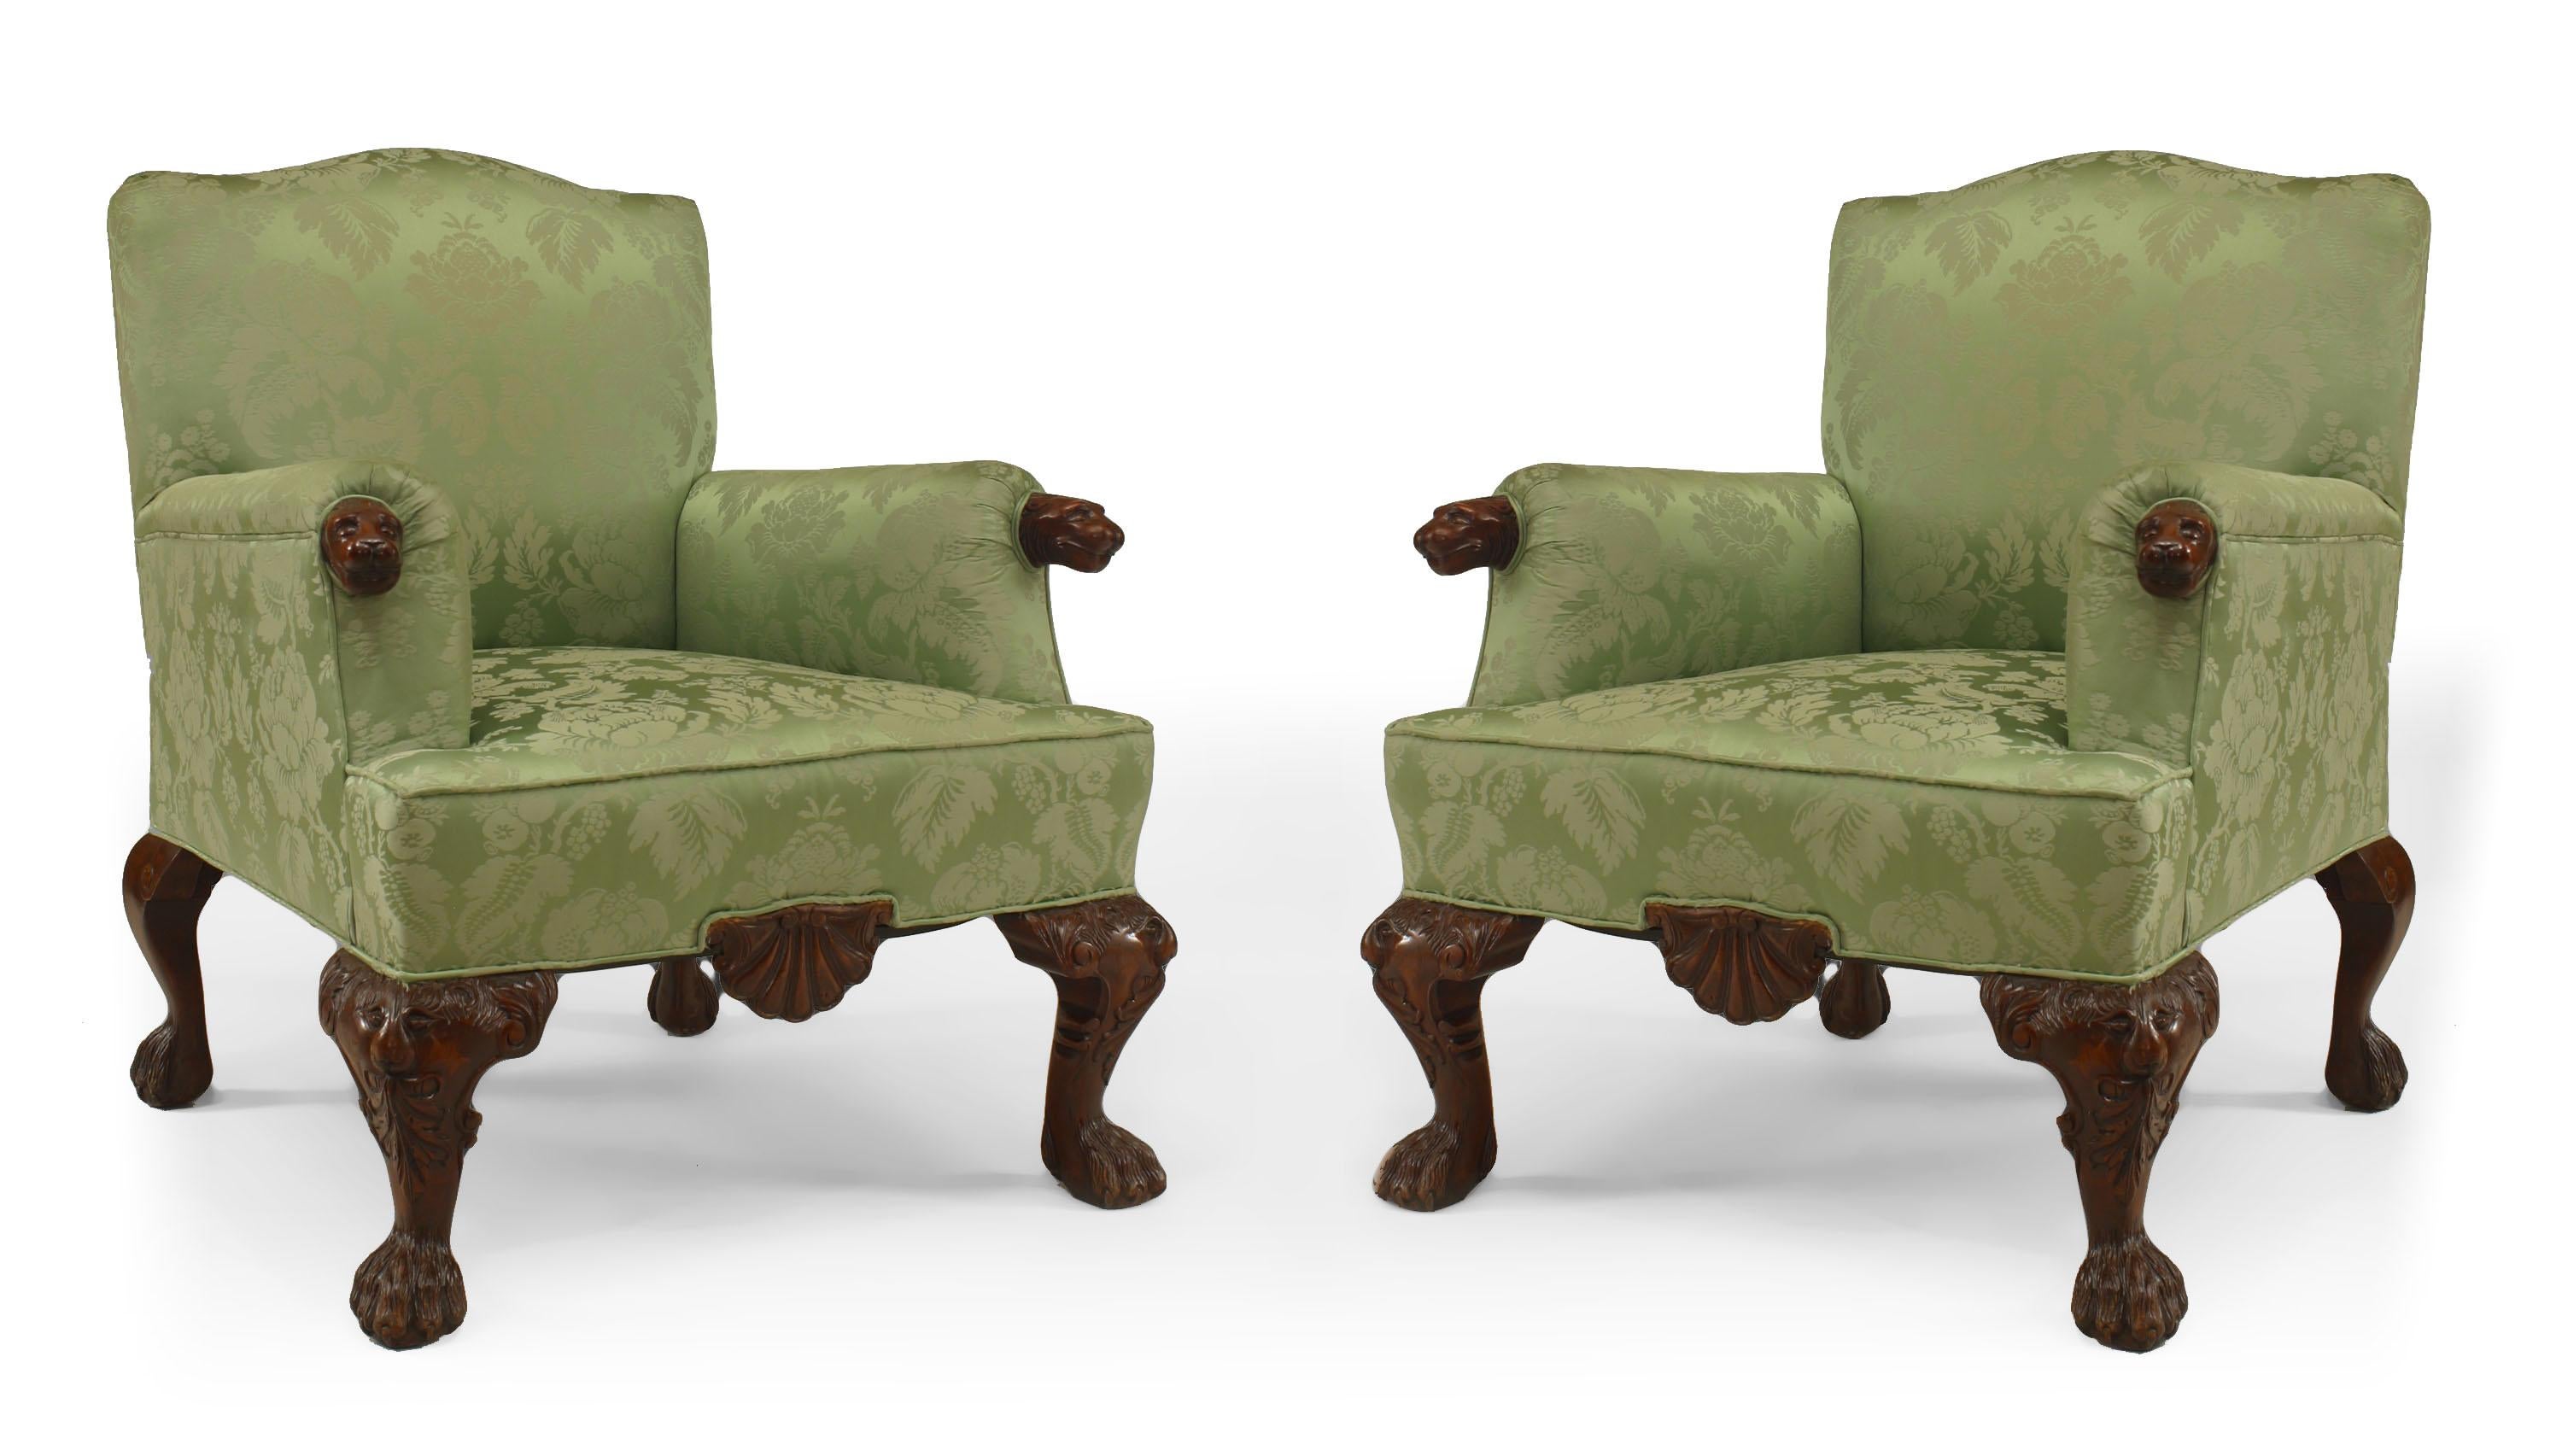 Set of 3 English Georgian mahogany living room / salon set with carved lion arms & heads on legs with green upholstery. (Sofa: 55